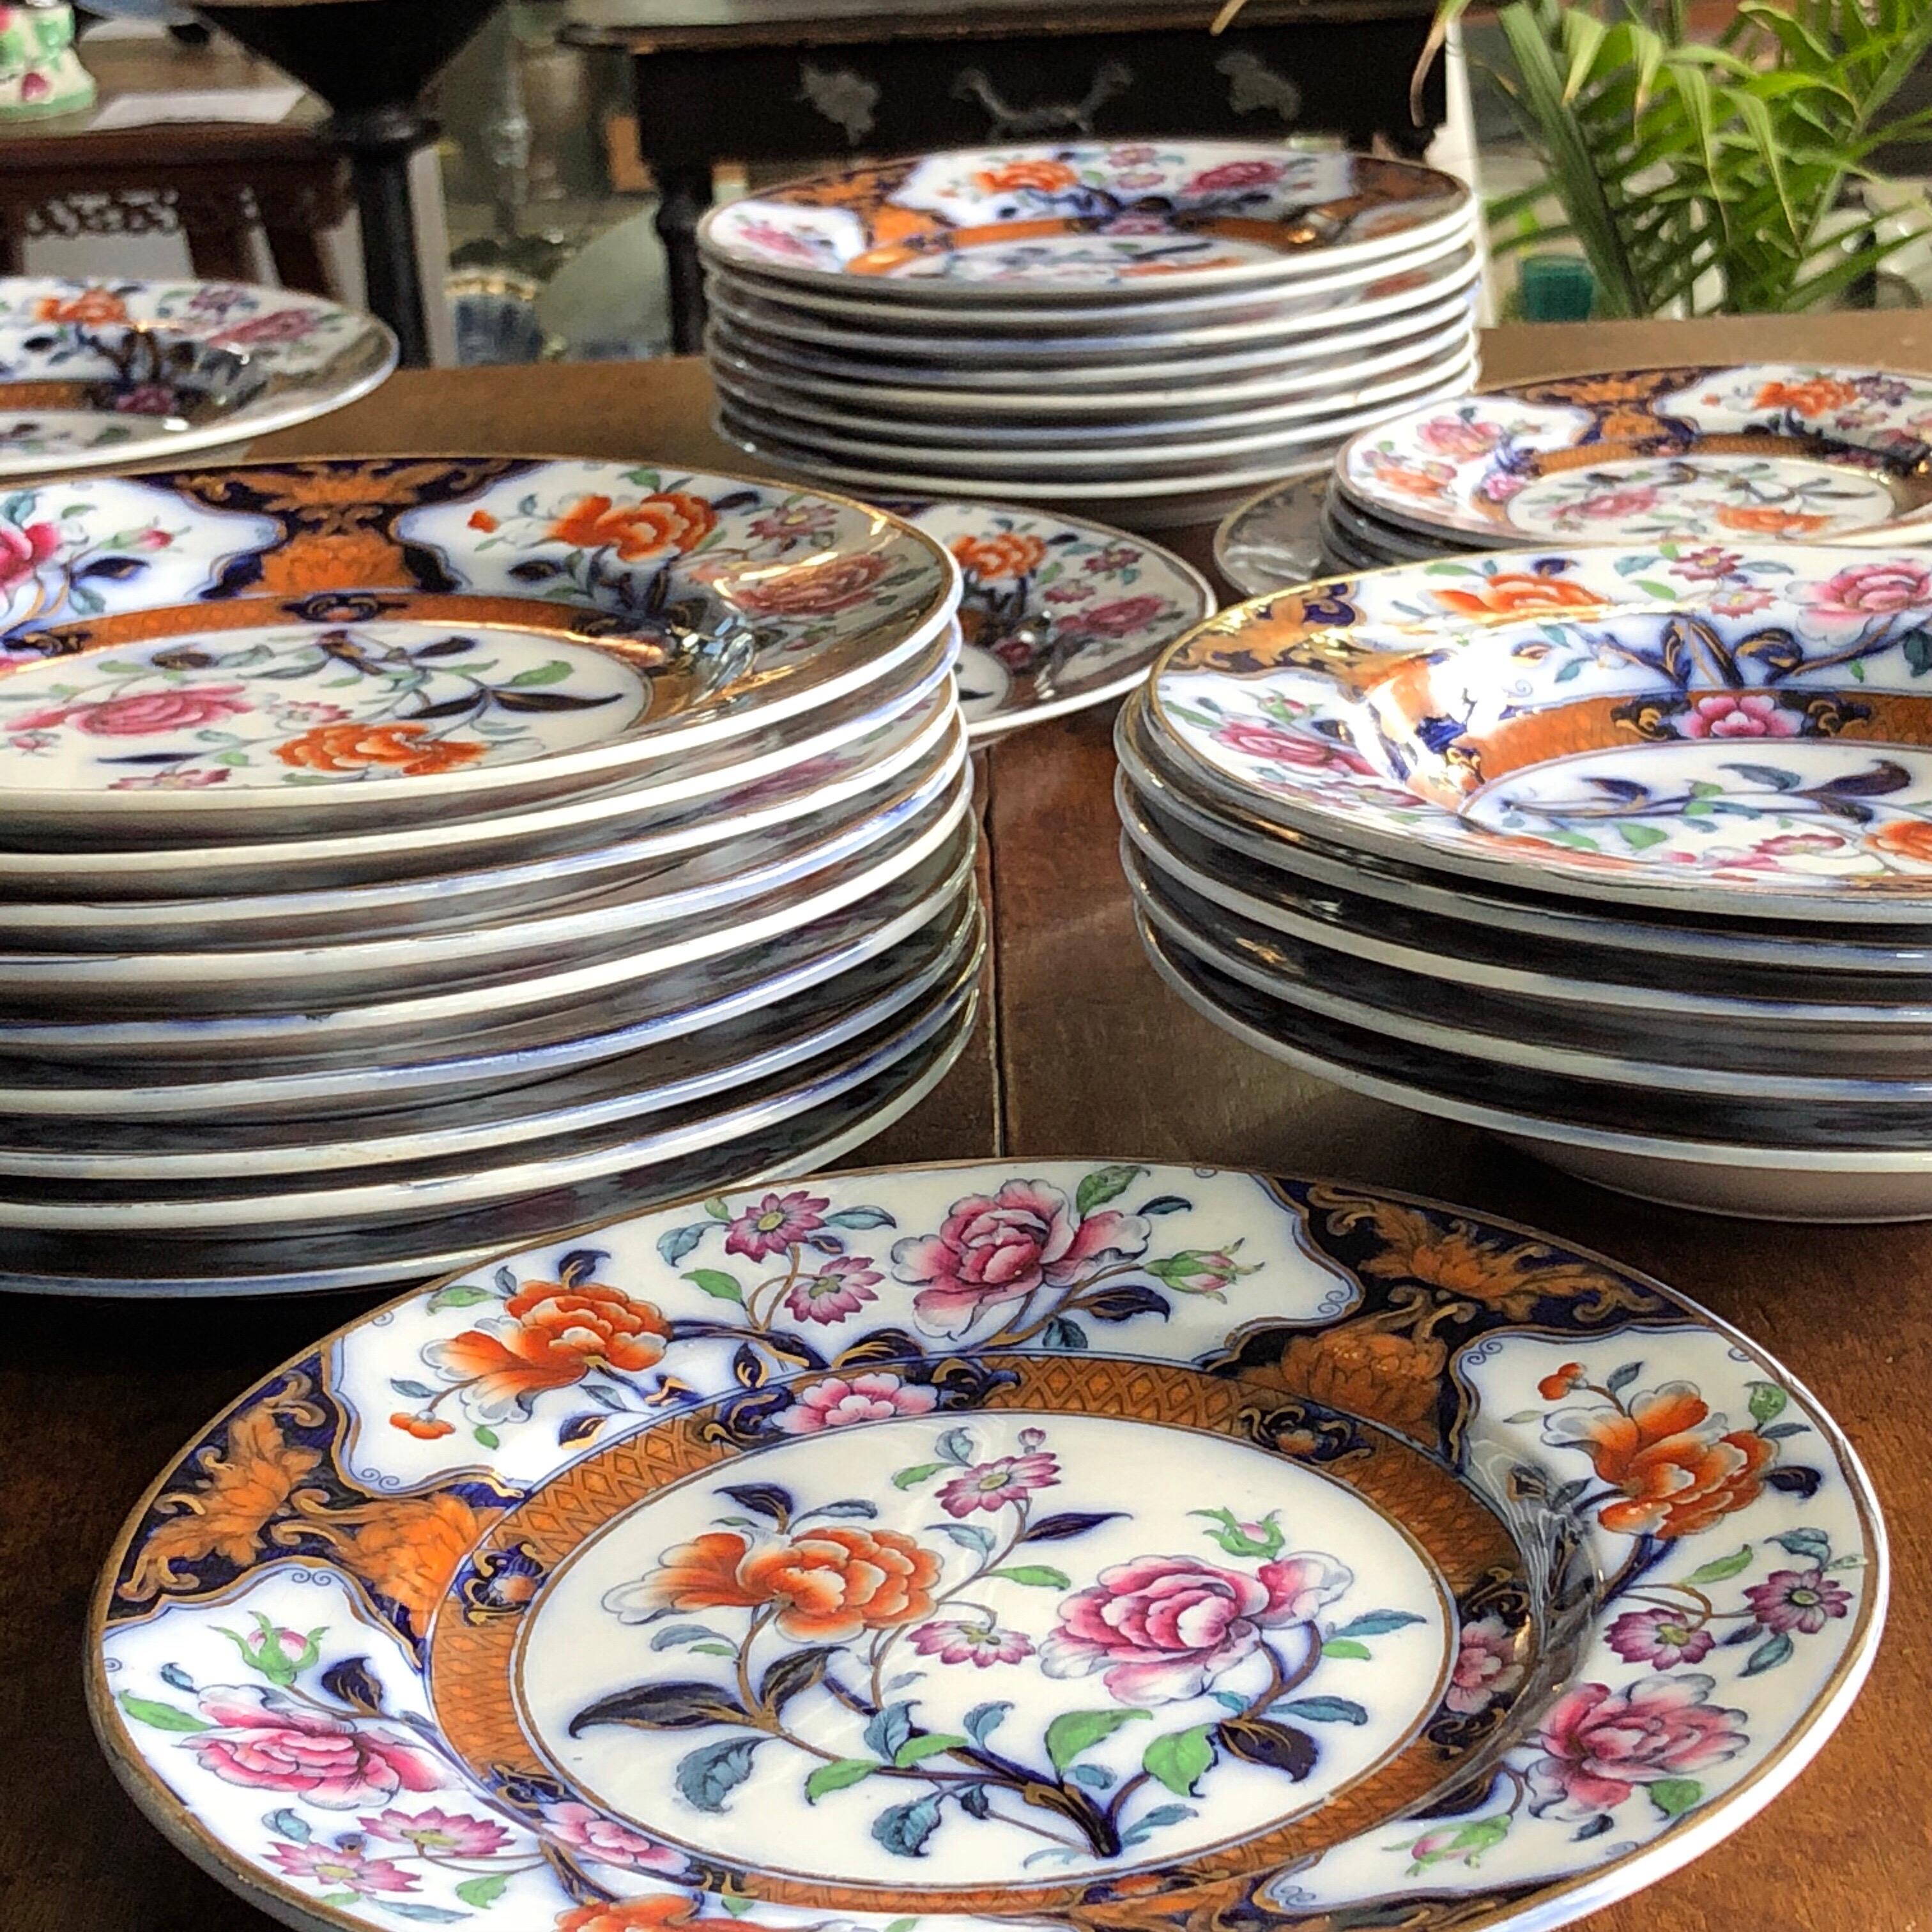 Handsome early Victorian ironstone service, richly decorated with enamel flowers and foliage within reserves on a deep blue ground, within gilt rims.

Pattern number 2/3186
most pieces marked ‘EUGE’NIE’ , impressed ‘PEARL’ and other marks,
circa